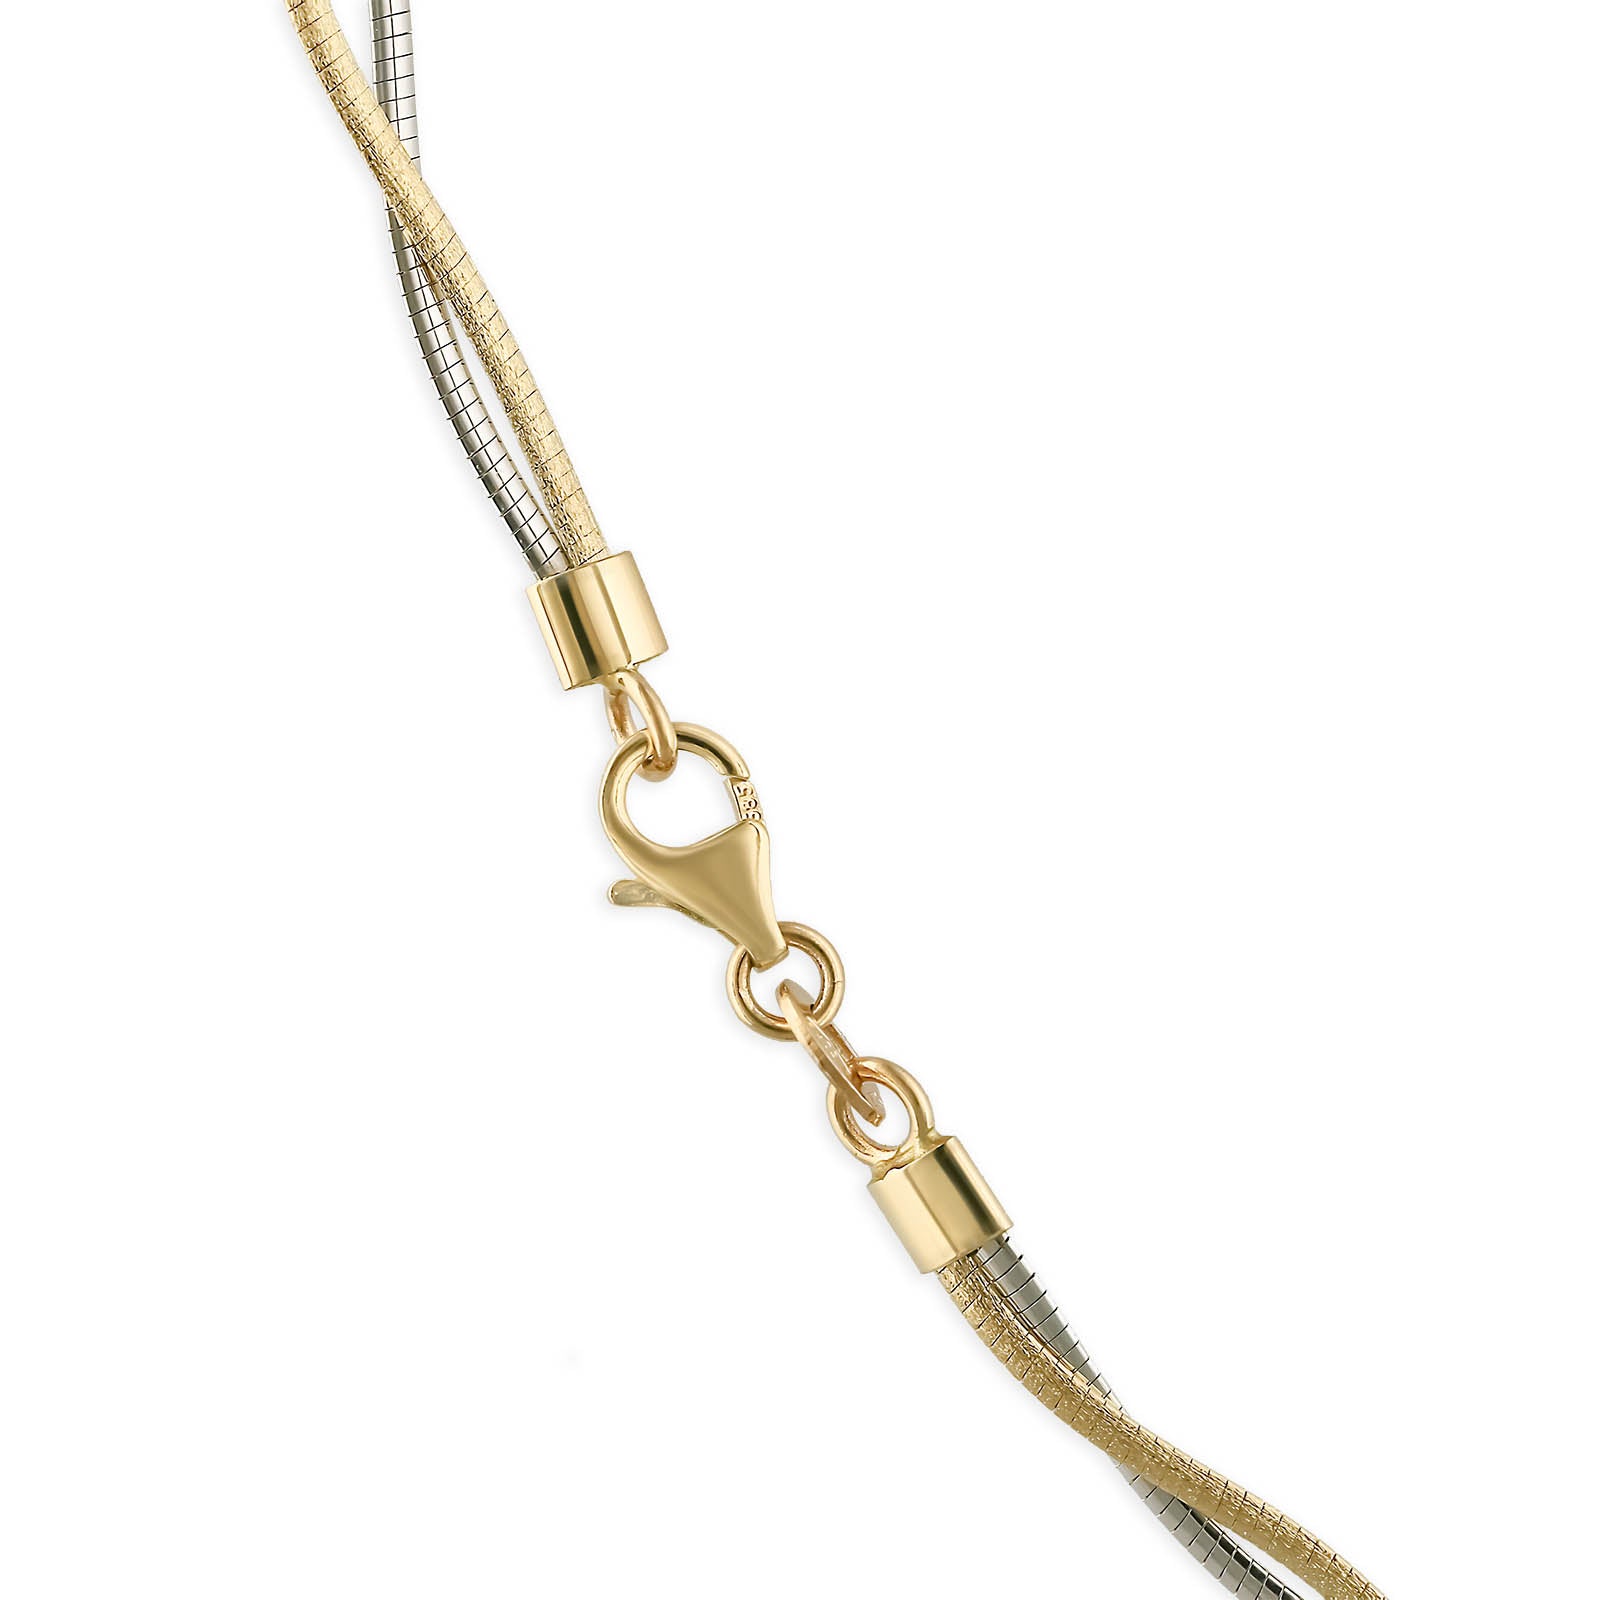 700161 - 14K White Gold and 14K Yellow Gold - Twisted Omega Necklace